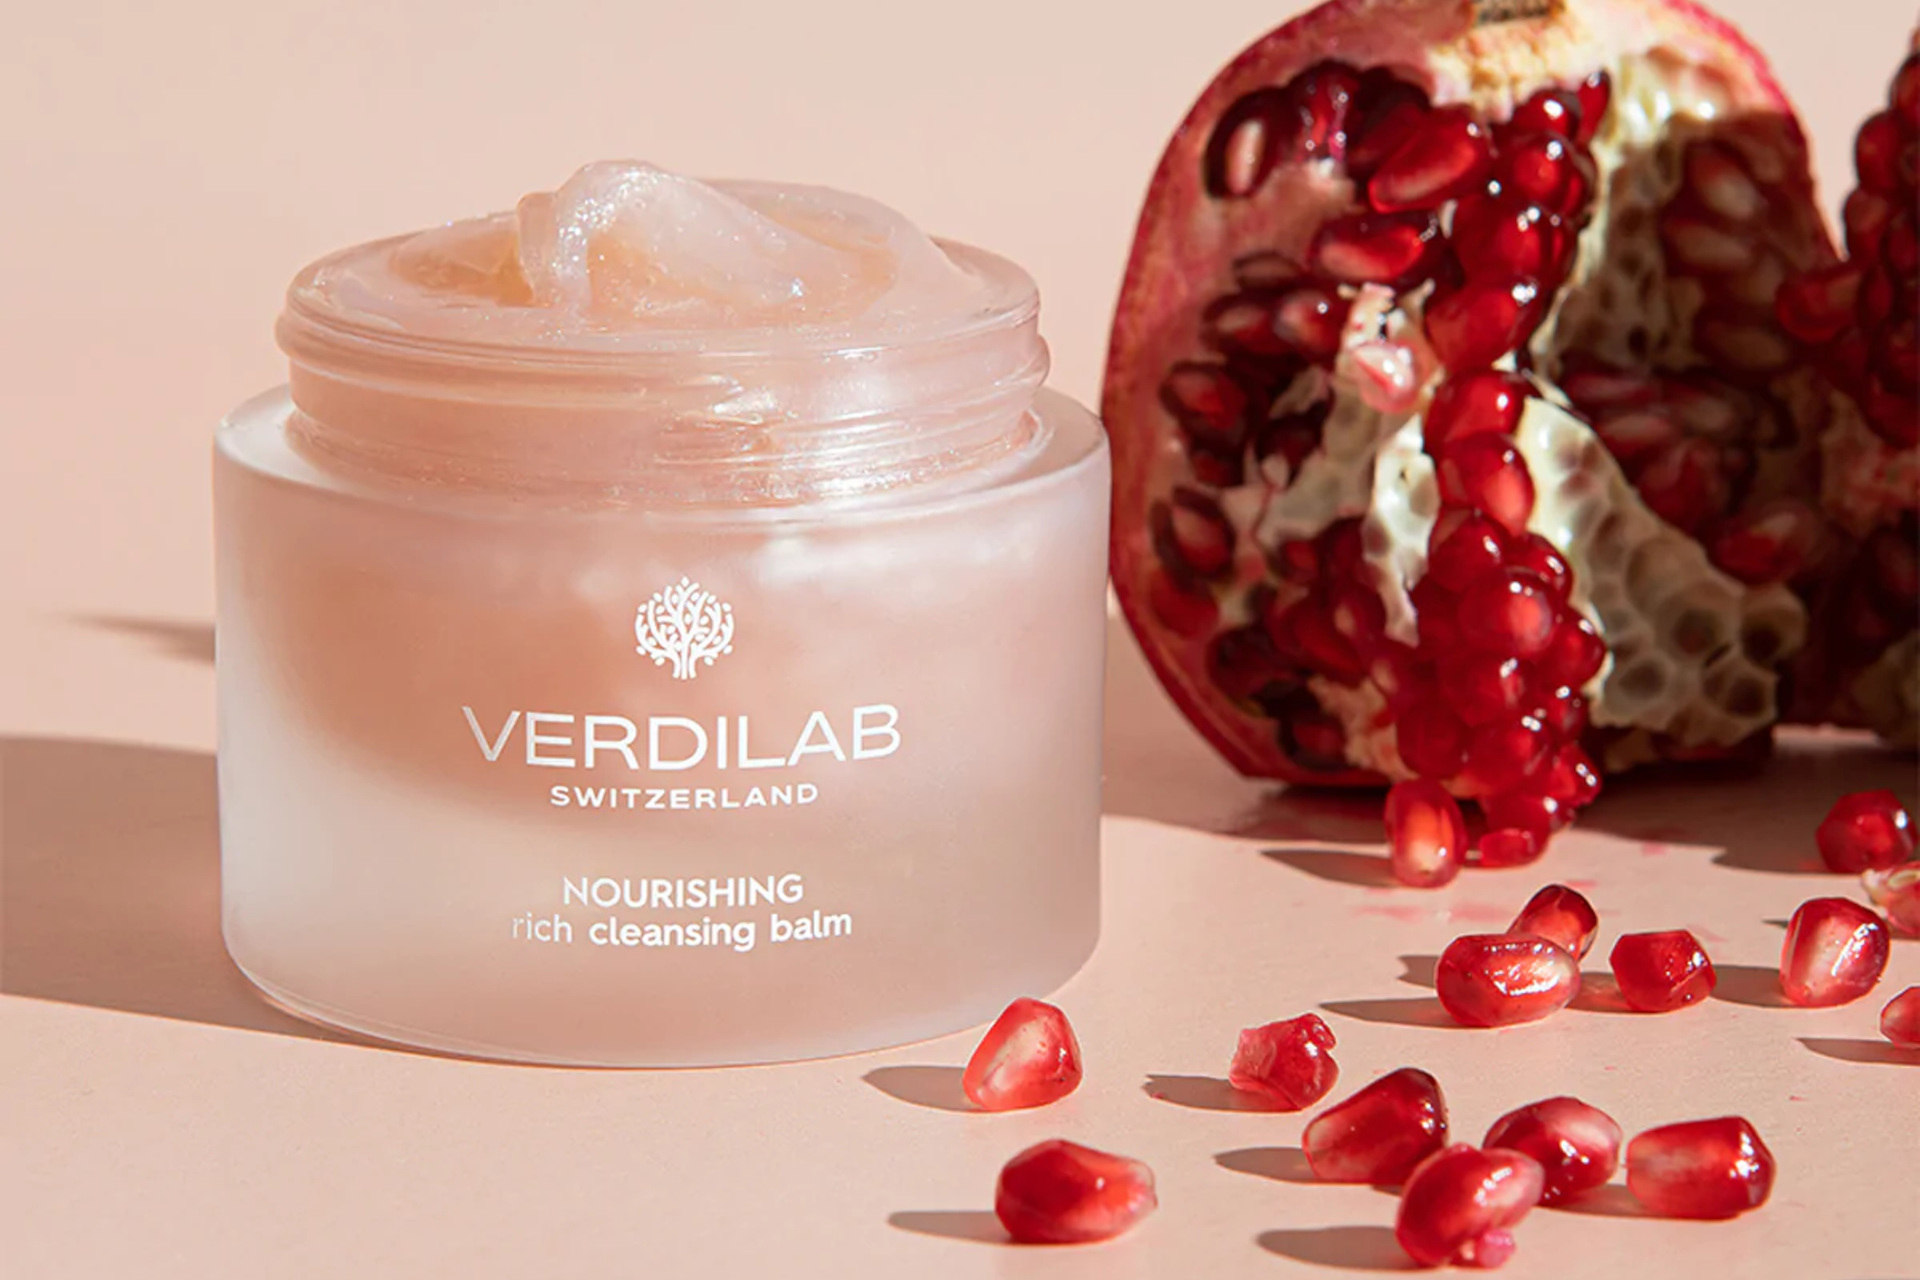 Pink tub of cleansing cream next to pomegranate and seeds